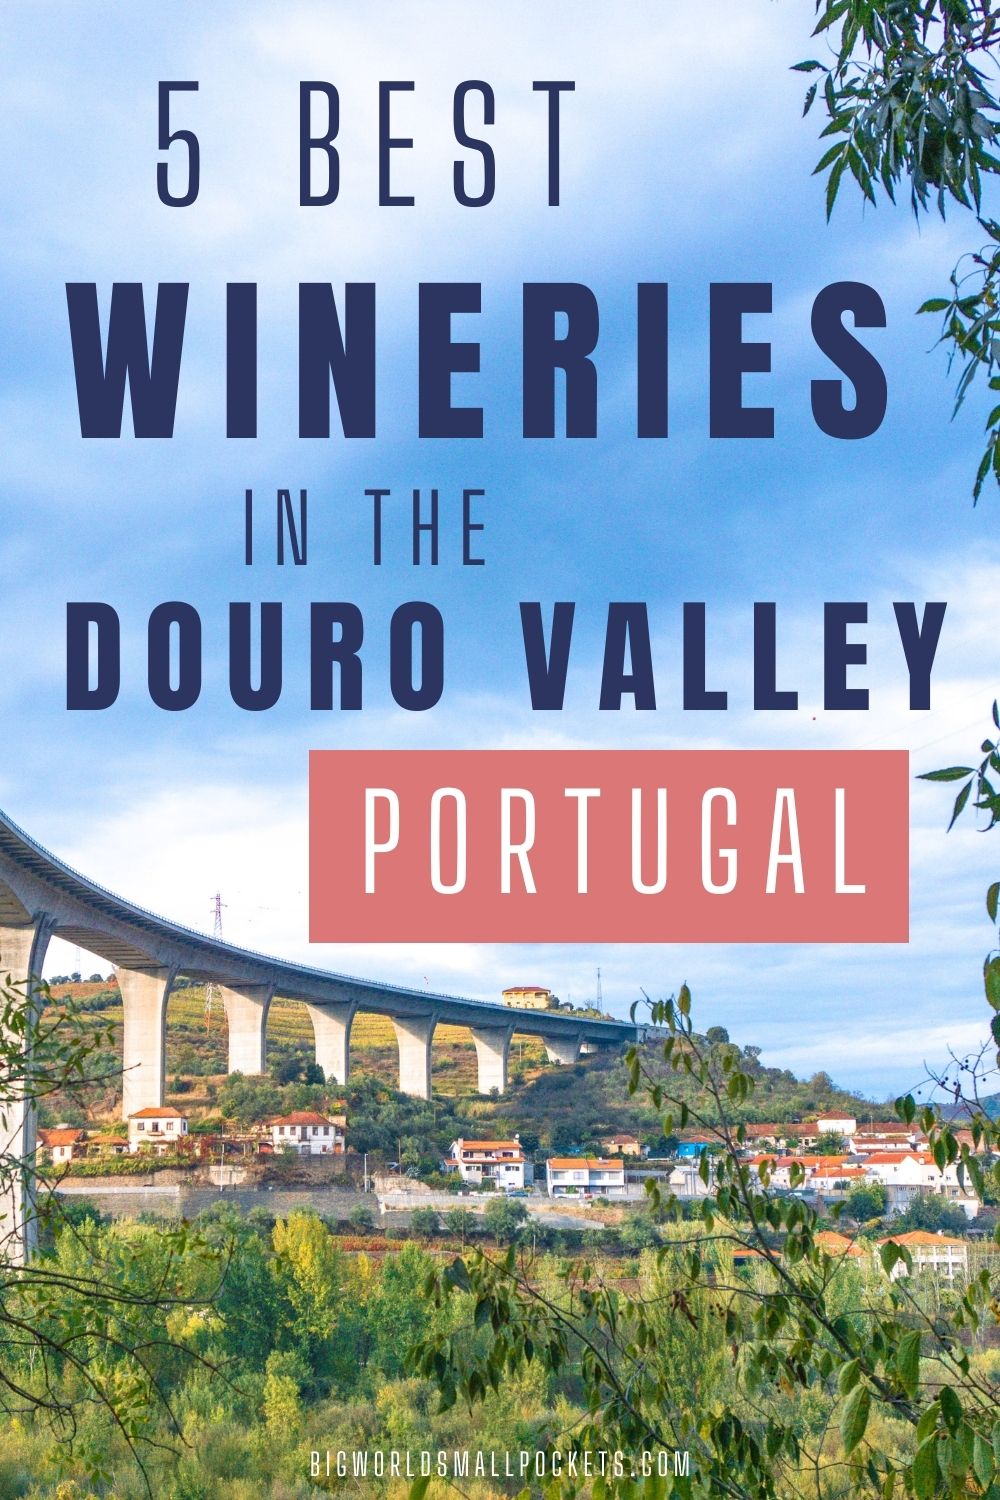 5 Best Wineries in the Douro Valley, Portugal